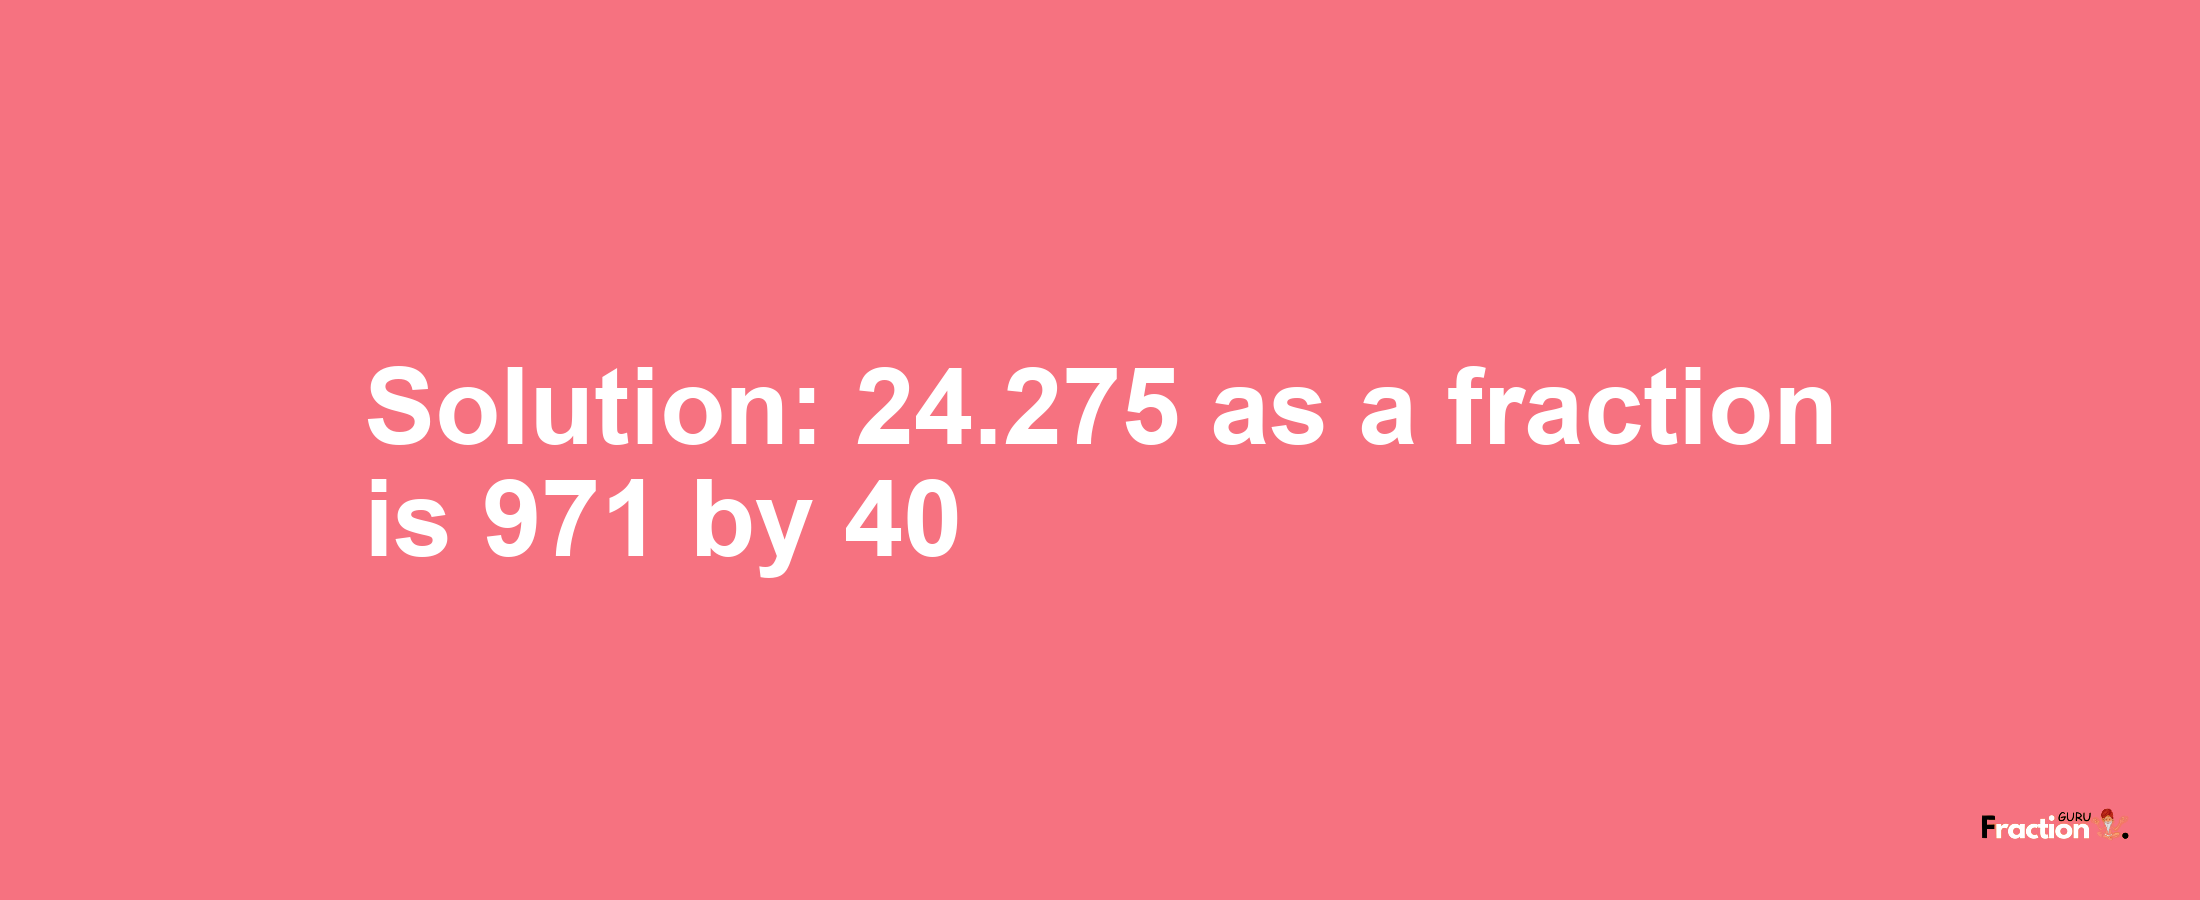 Solution:24.275 as a fraction is 971/40